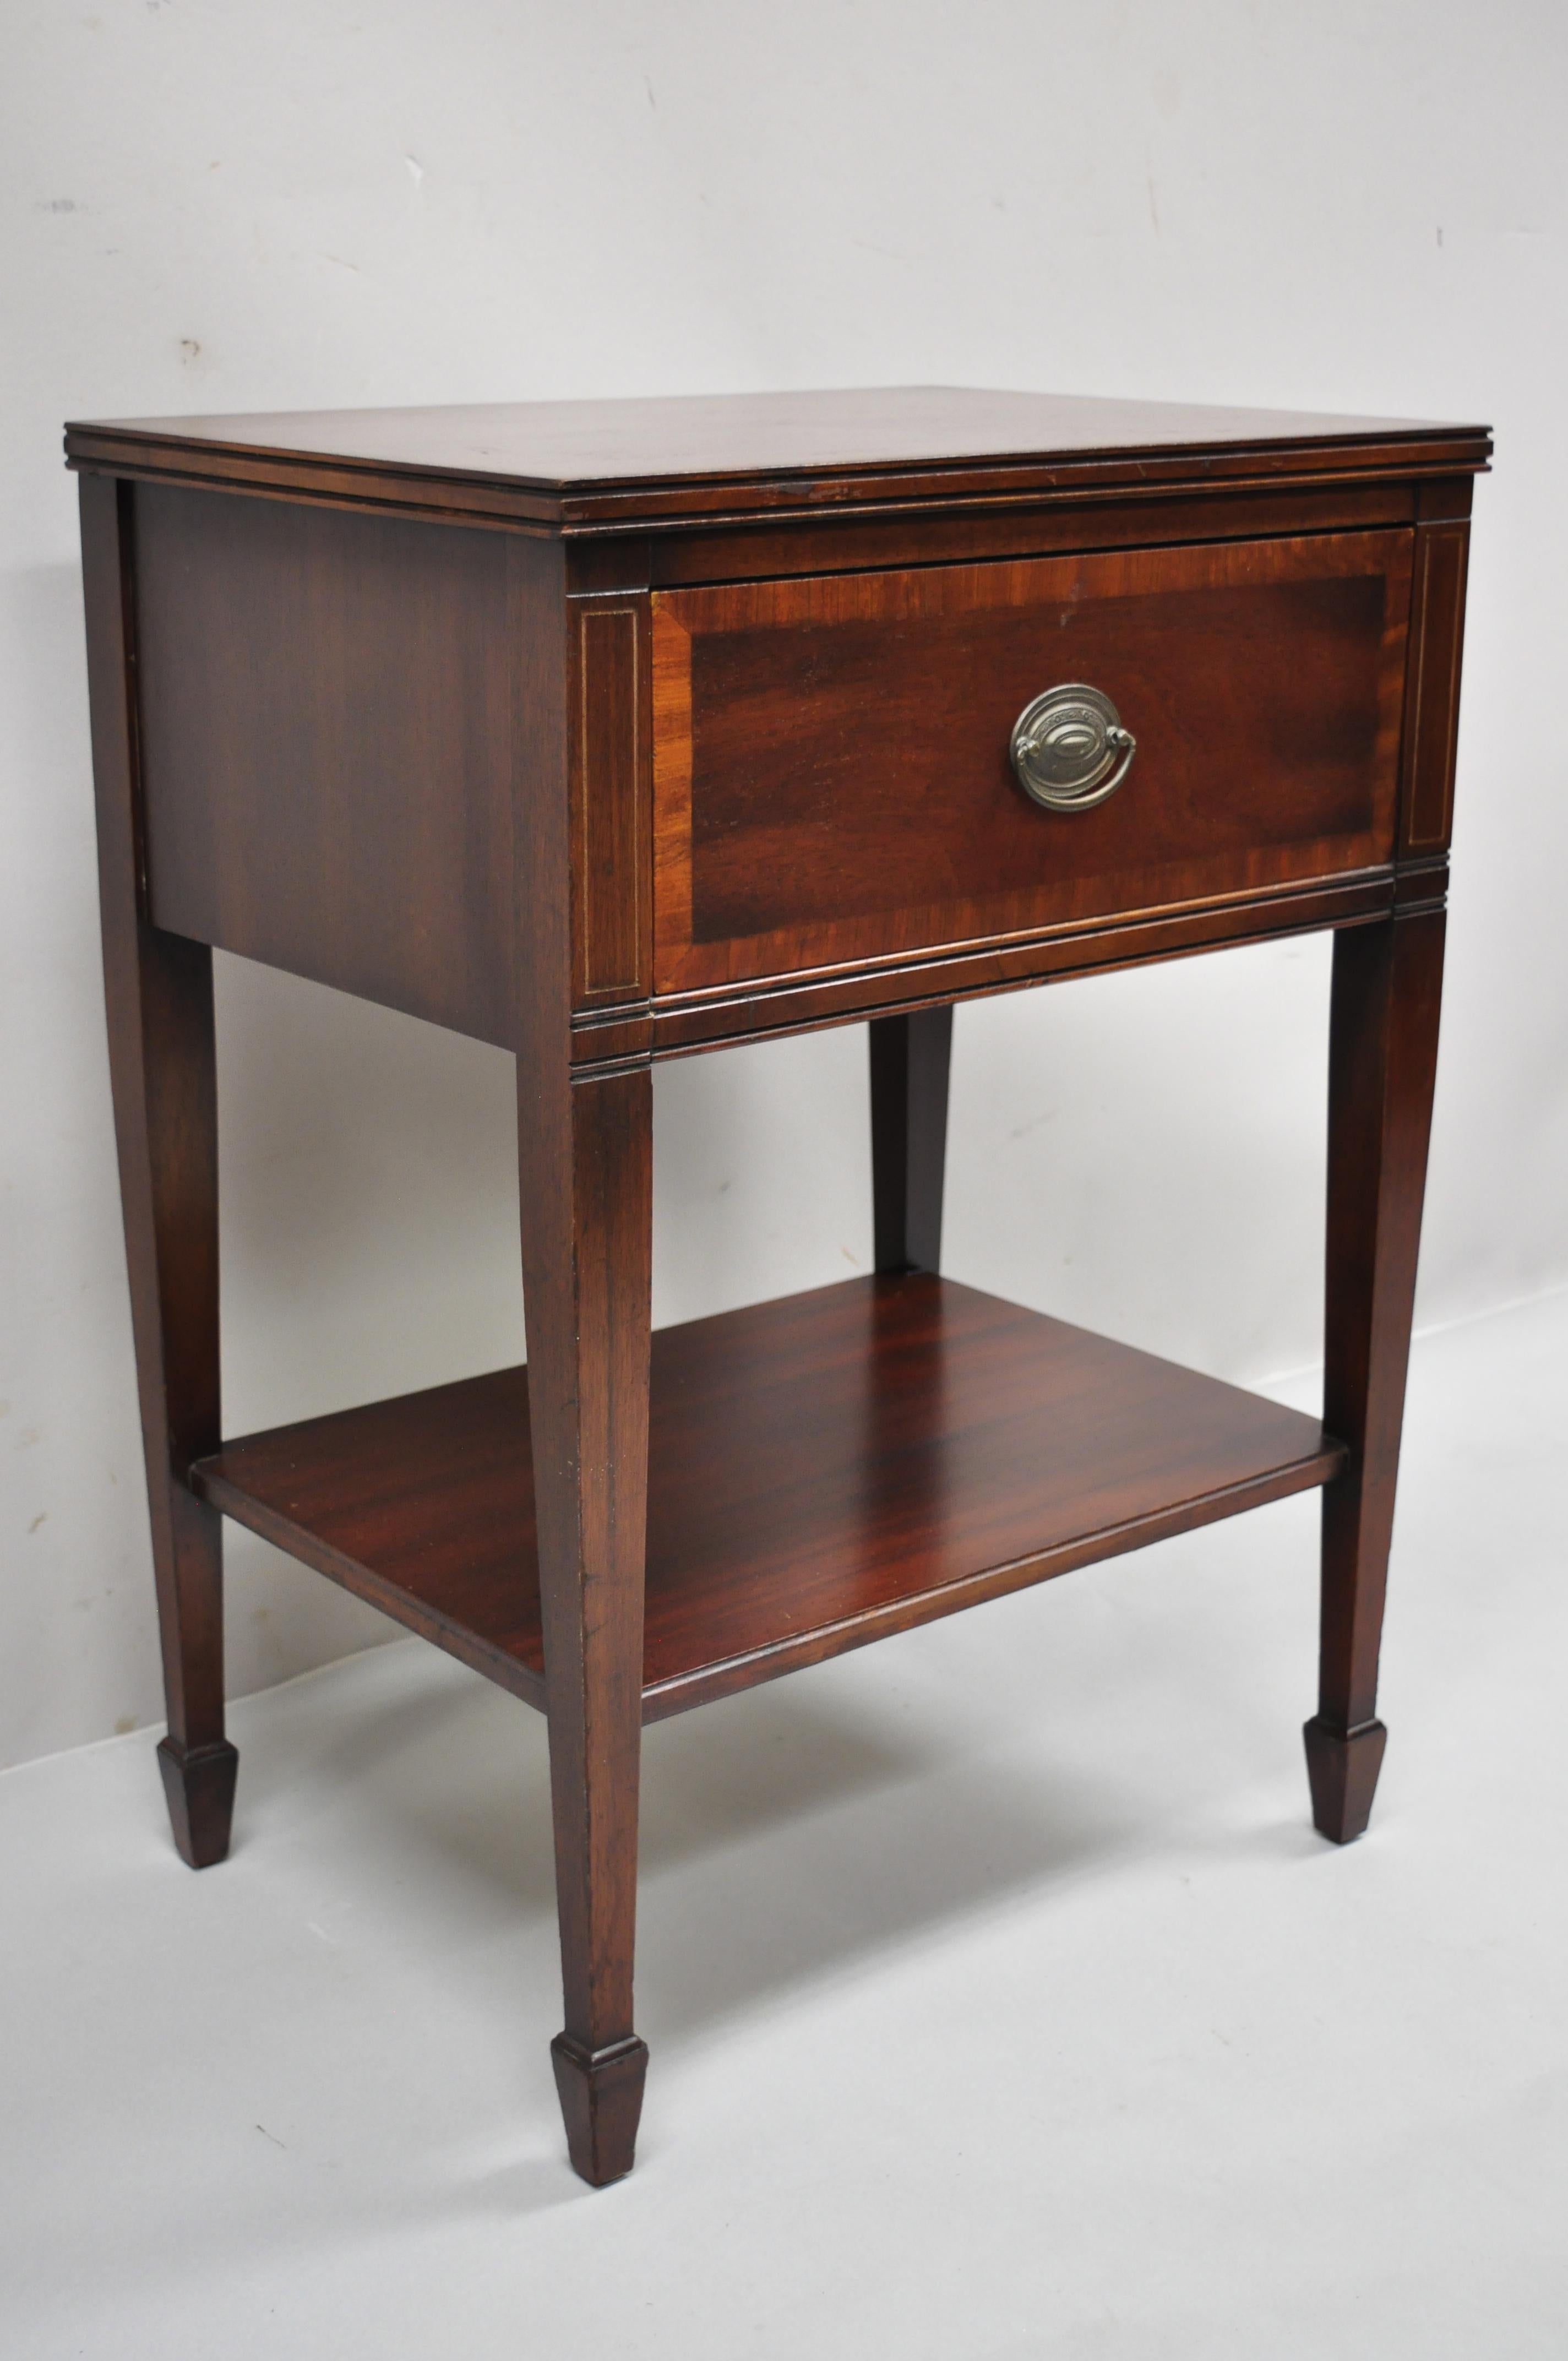 Mahogany one drawer banded inlay Sheraton federal nightstand bedside table by Stiehl. Item features banded drawer front, lower shelf, beautiful wood grain, tapered legs, solid brass hardware, quality American craftsmanship. Circa Early 1900s.